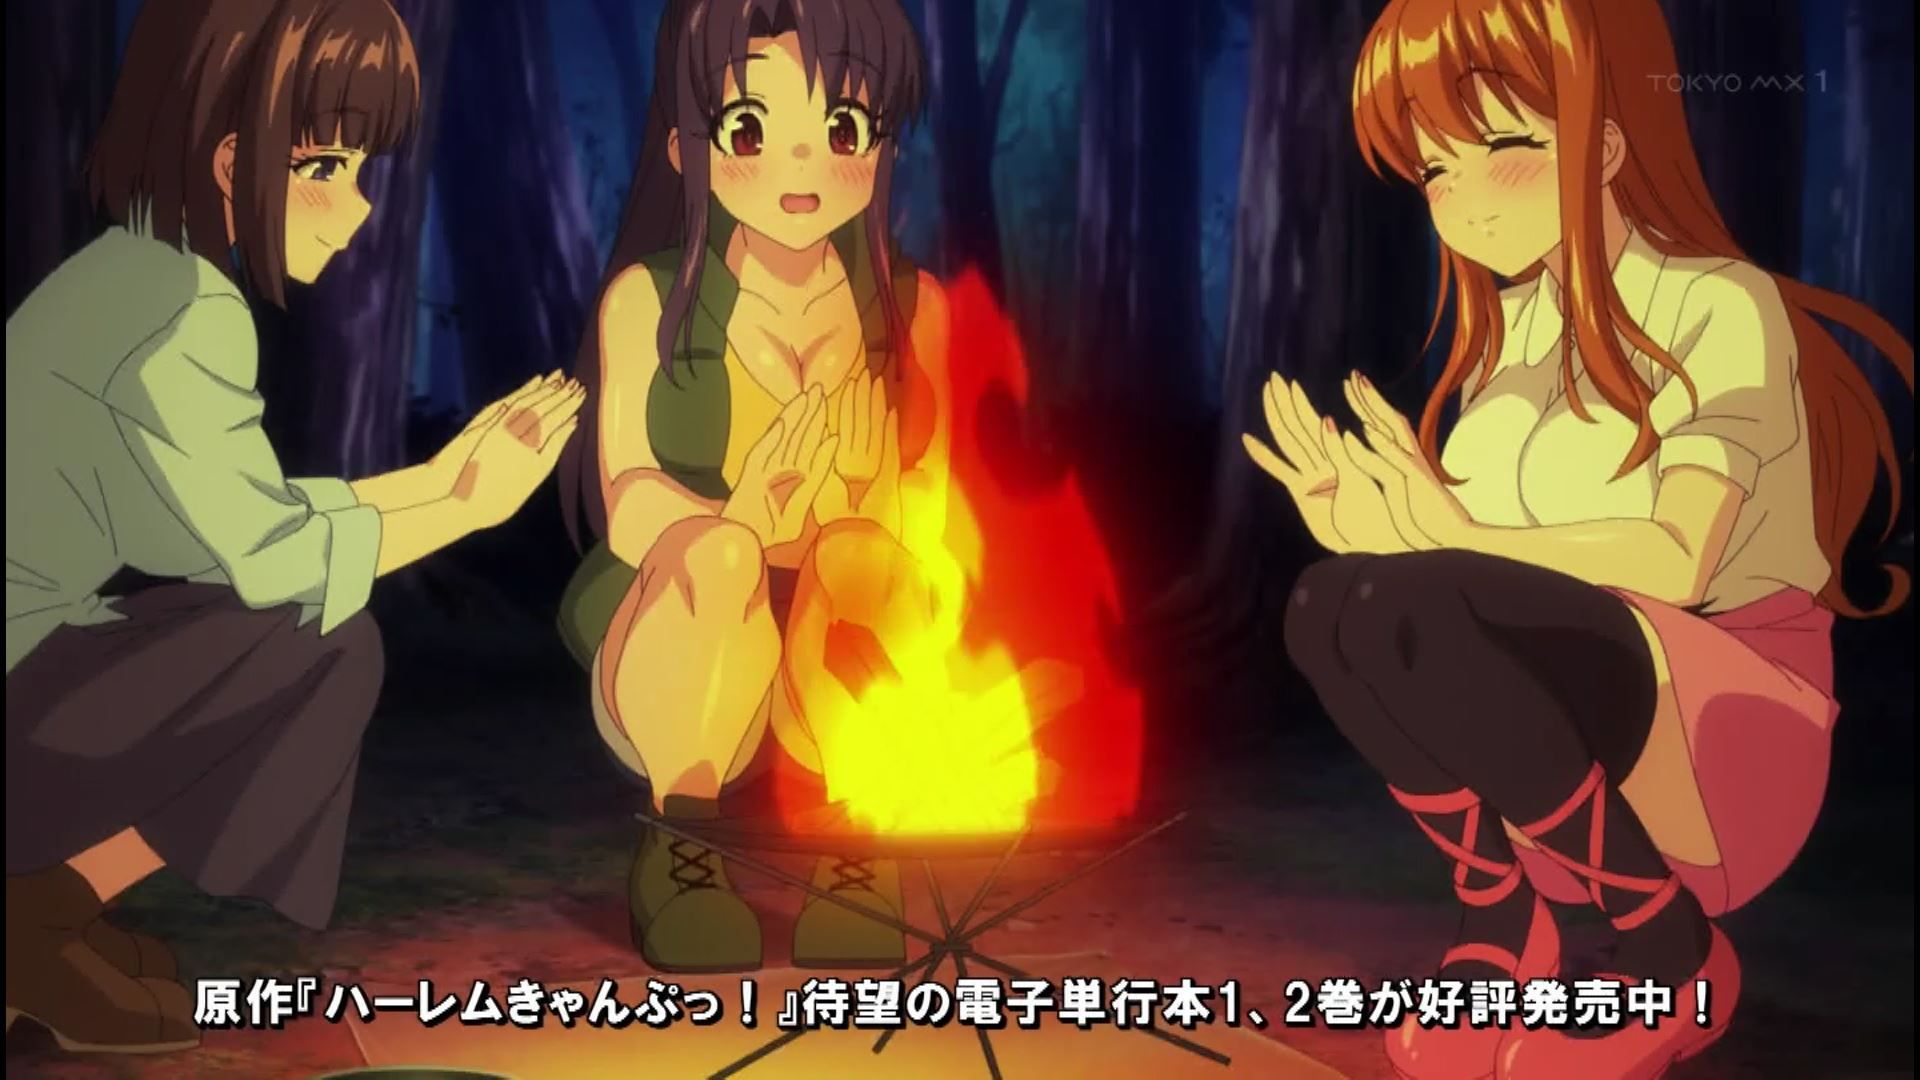 In the anime "Harlem Kyanpu!" episode 1, a girl stays in her uncle's tent and is attacked 6